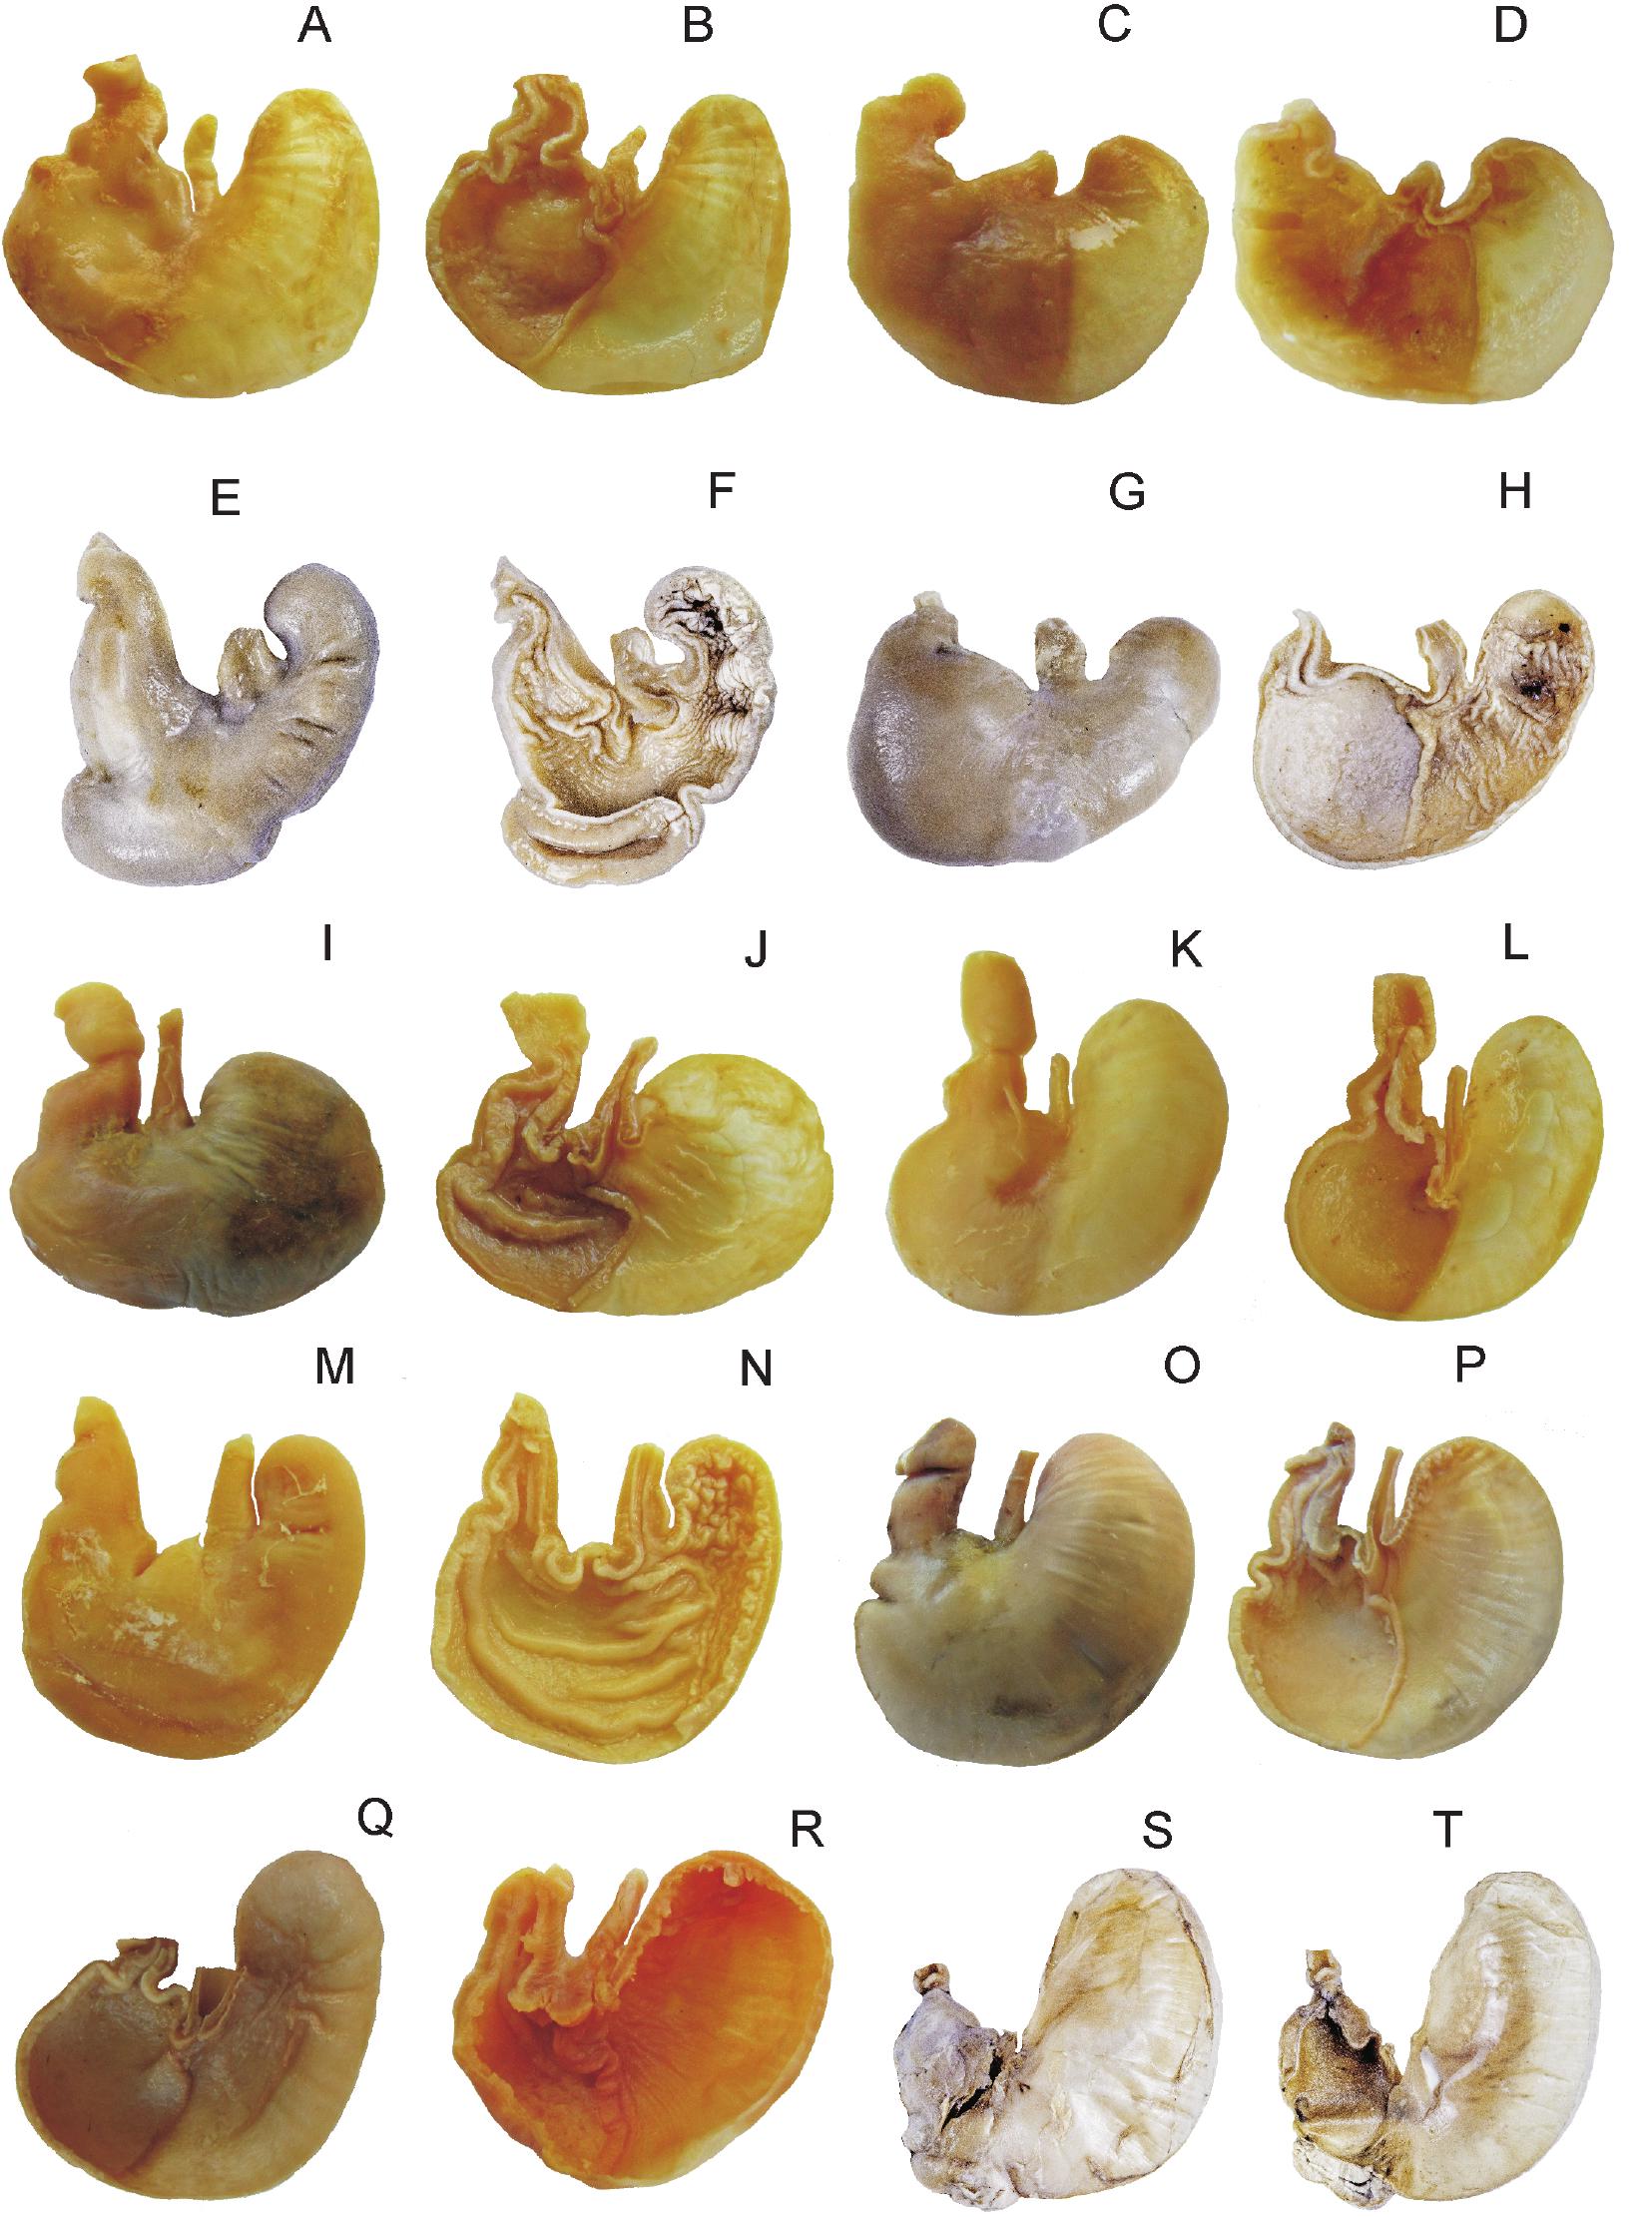 Gross Stomach Morphology In Akodontine Rodents Cricetidae Sigmodontinae Akodontini A Reappraisal Of Its Significance In A Phylogenetic Context